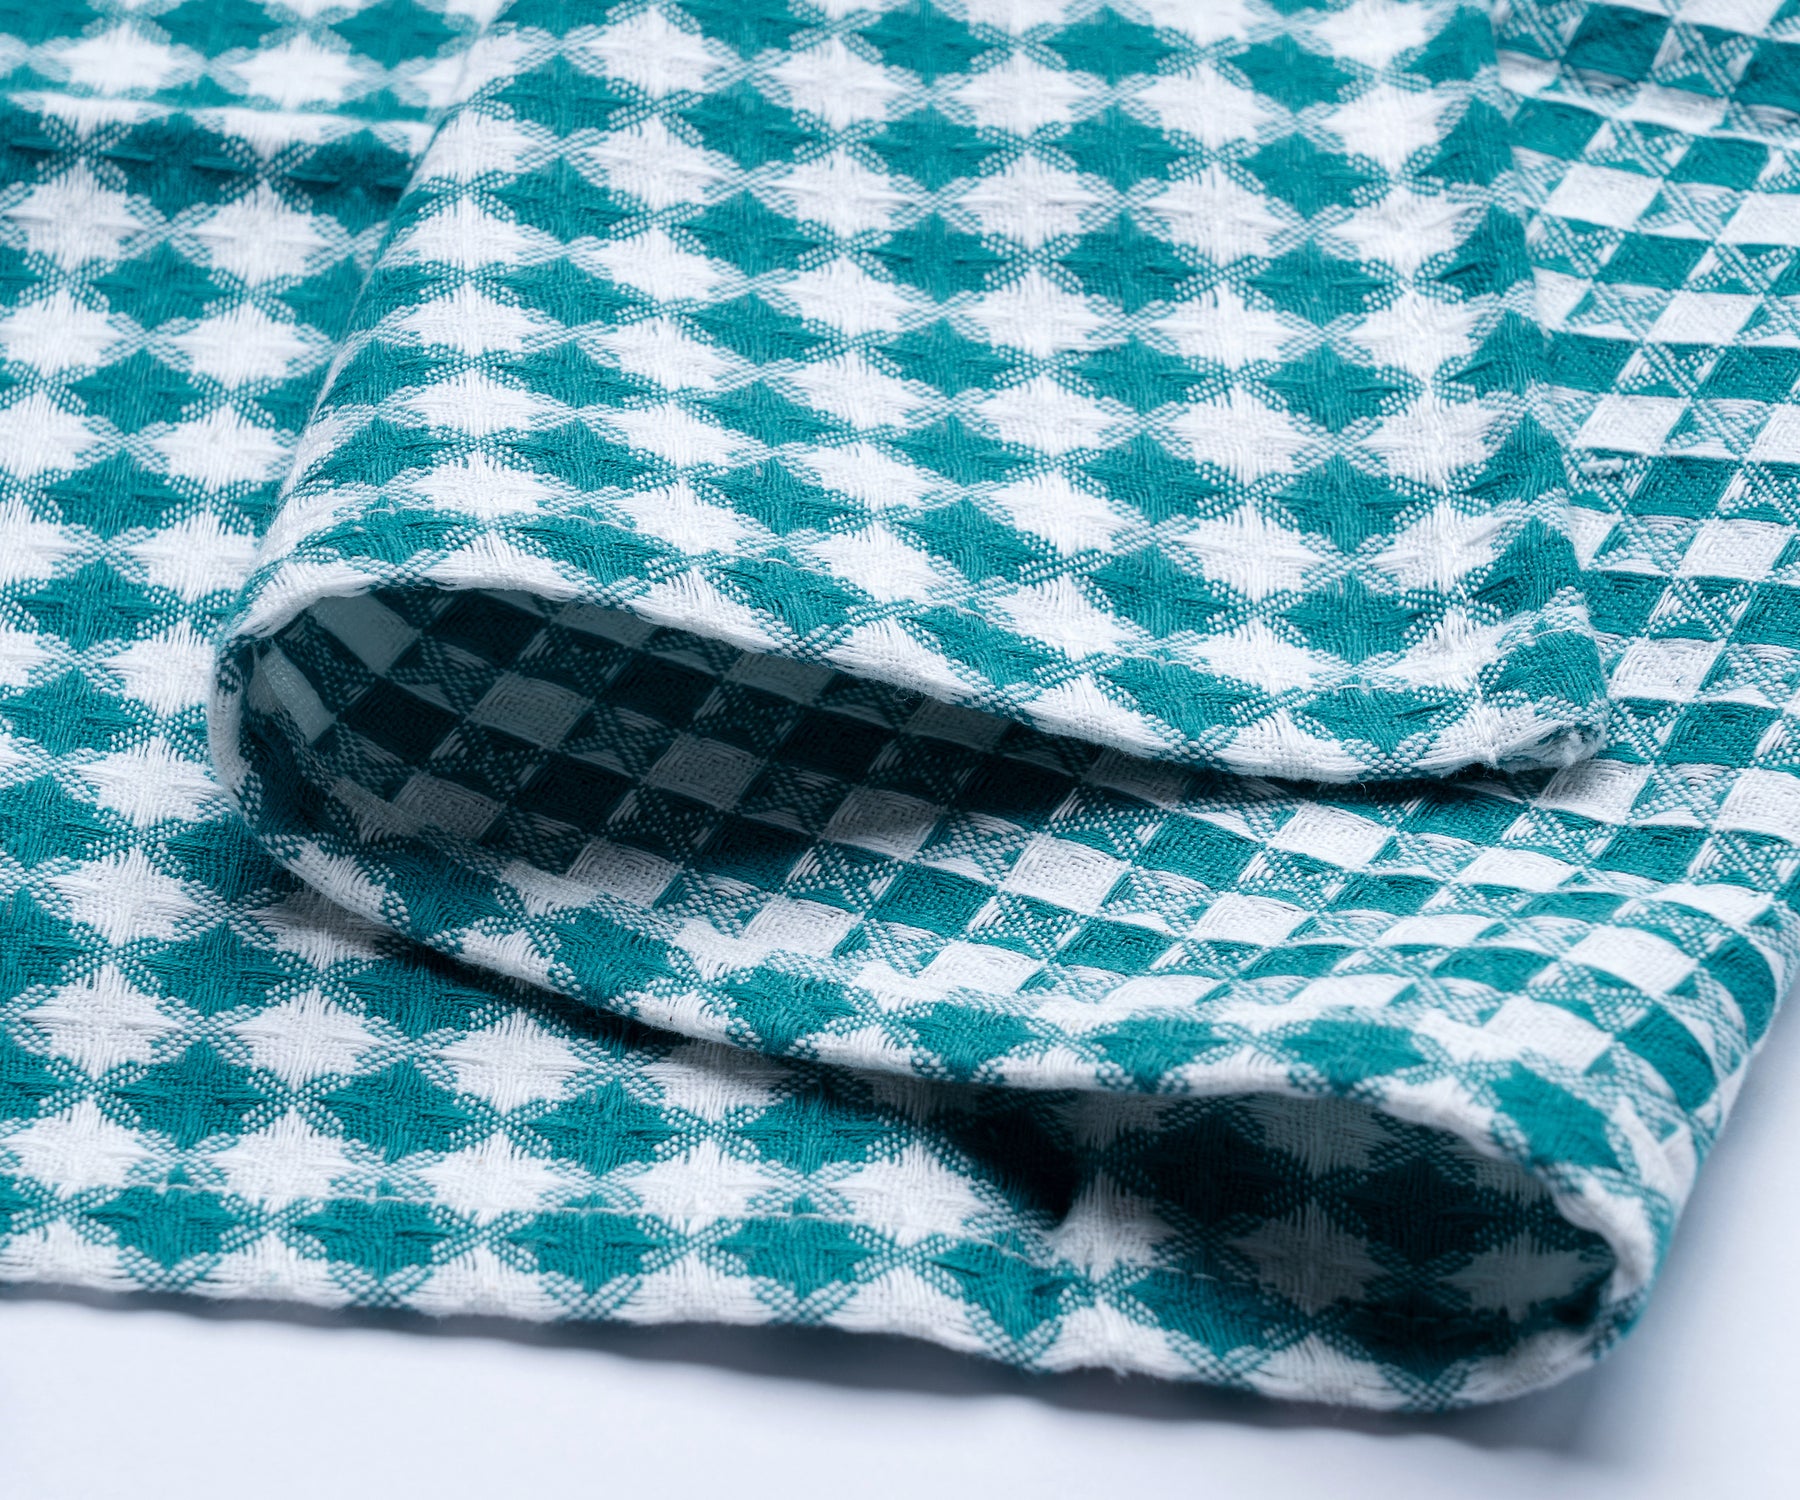 drying dish towels for kitchen, teal and white pattern kitchen towels, cloth dish towels for decoration